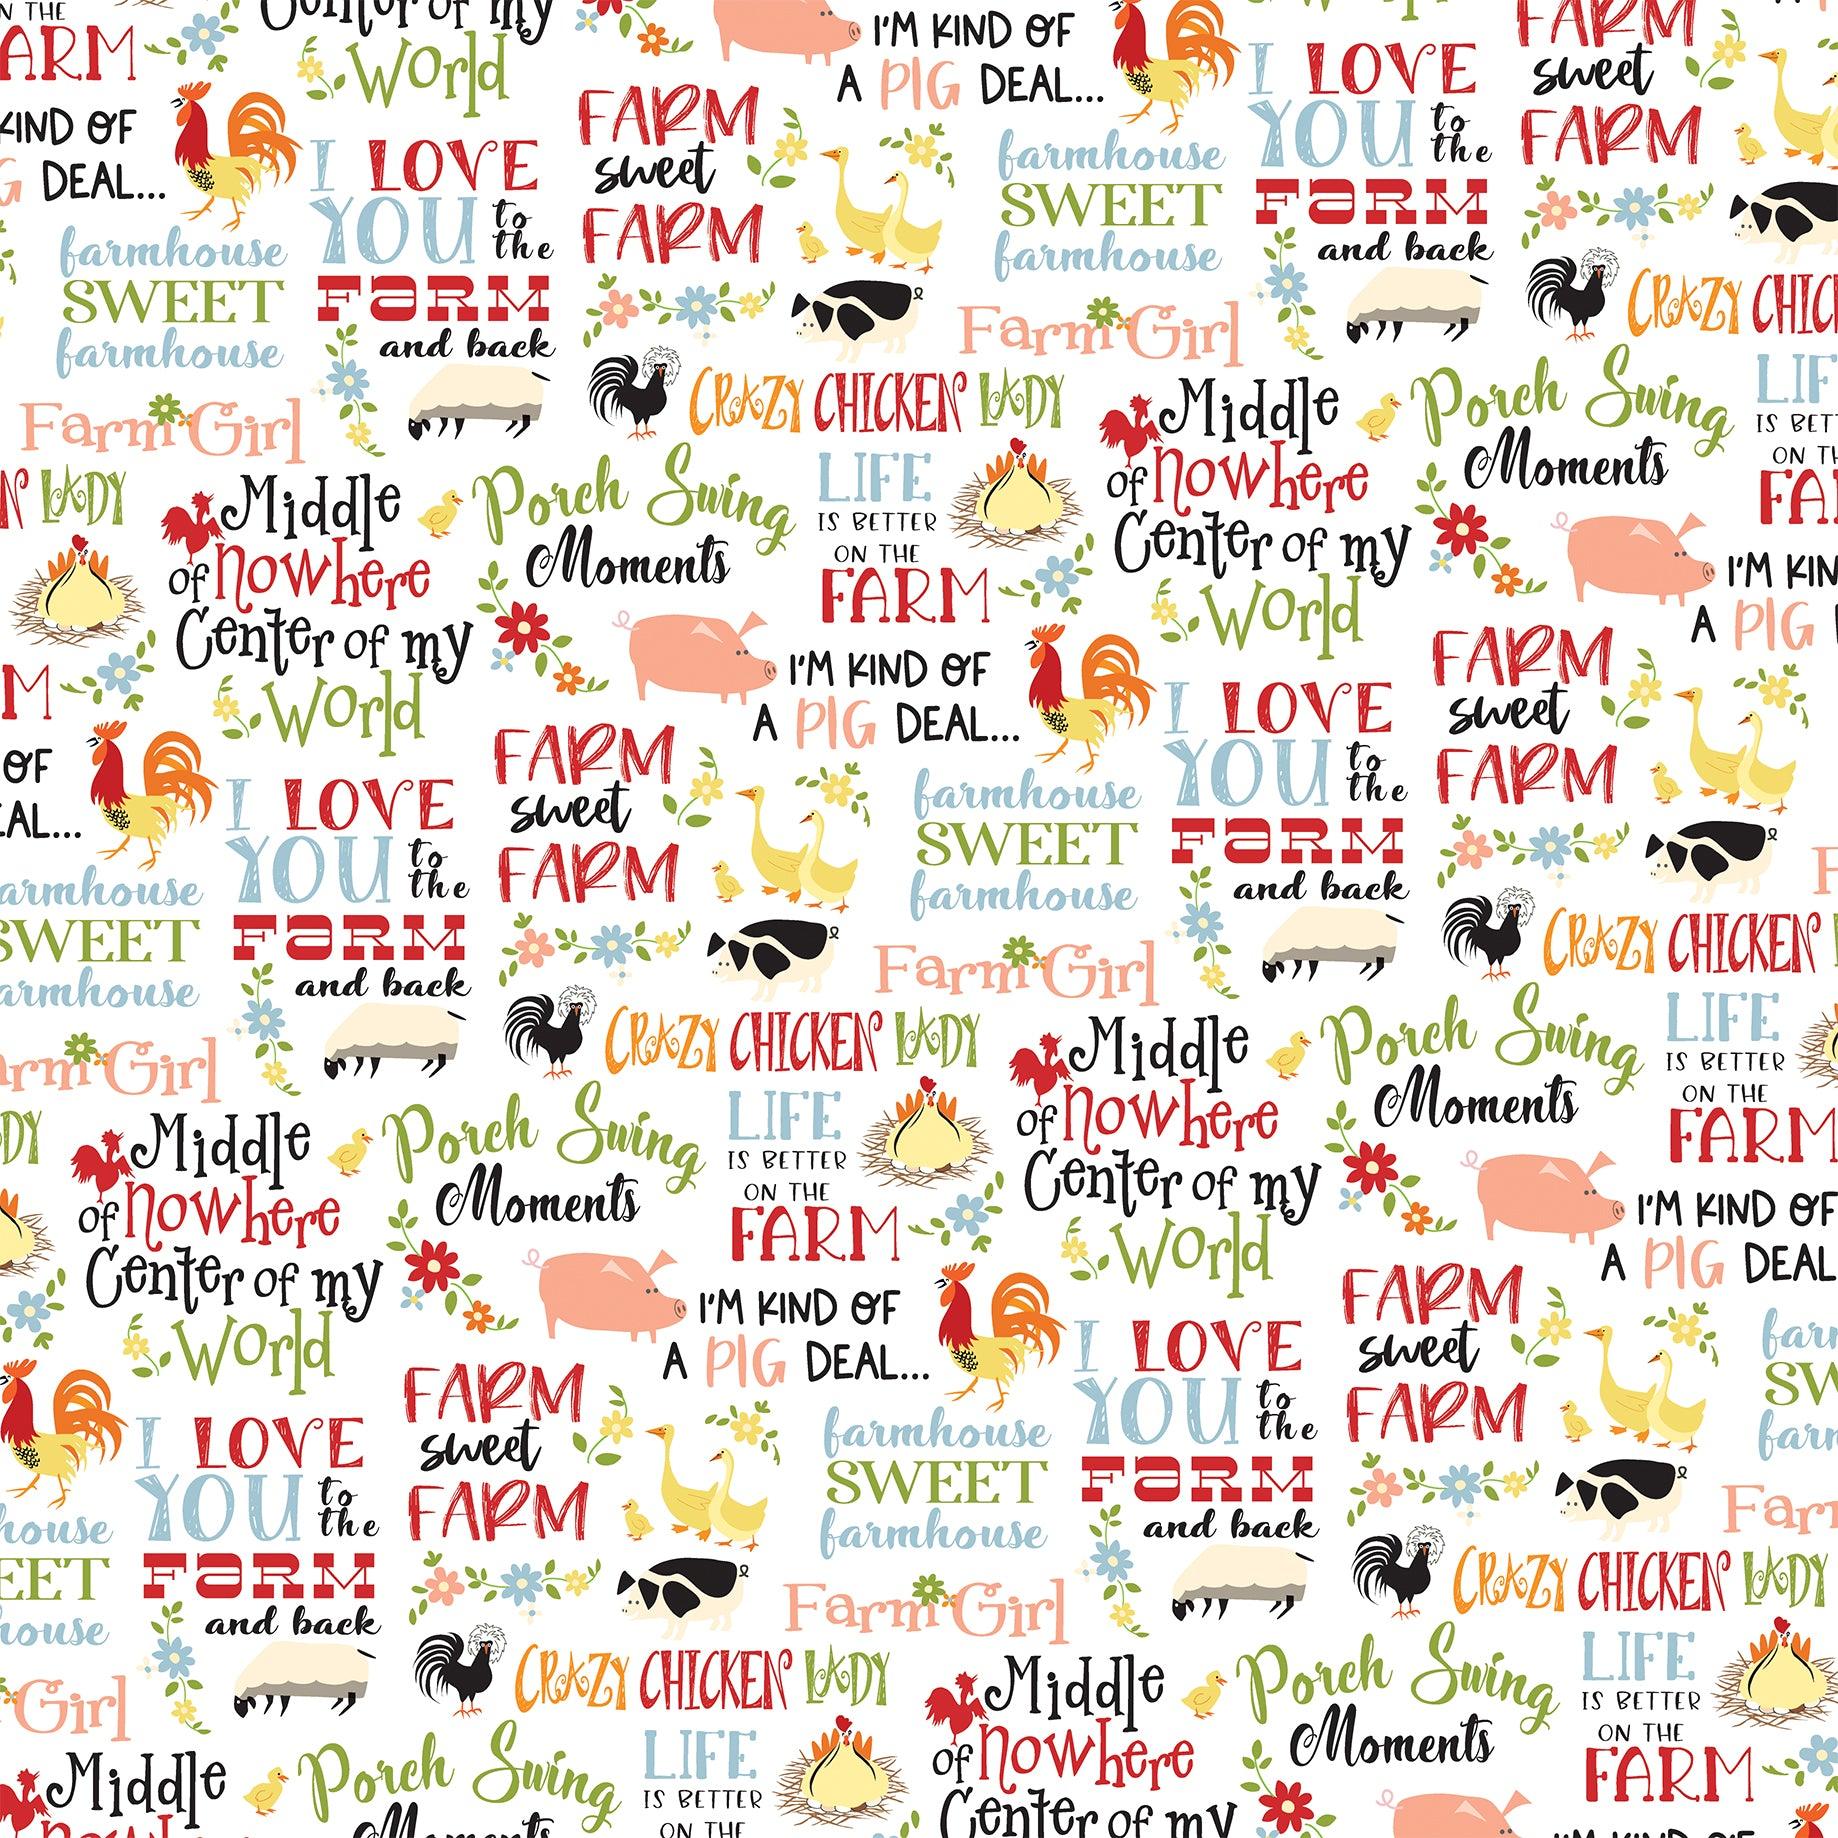 Farmhouse Living Collection Farm Girl Phrases 12 x 12 Double-Sided Scrapbook Paper by Carta Bella - Scrapbook Supply Companies